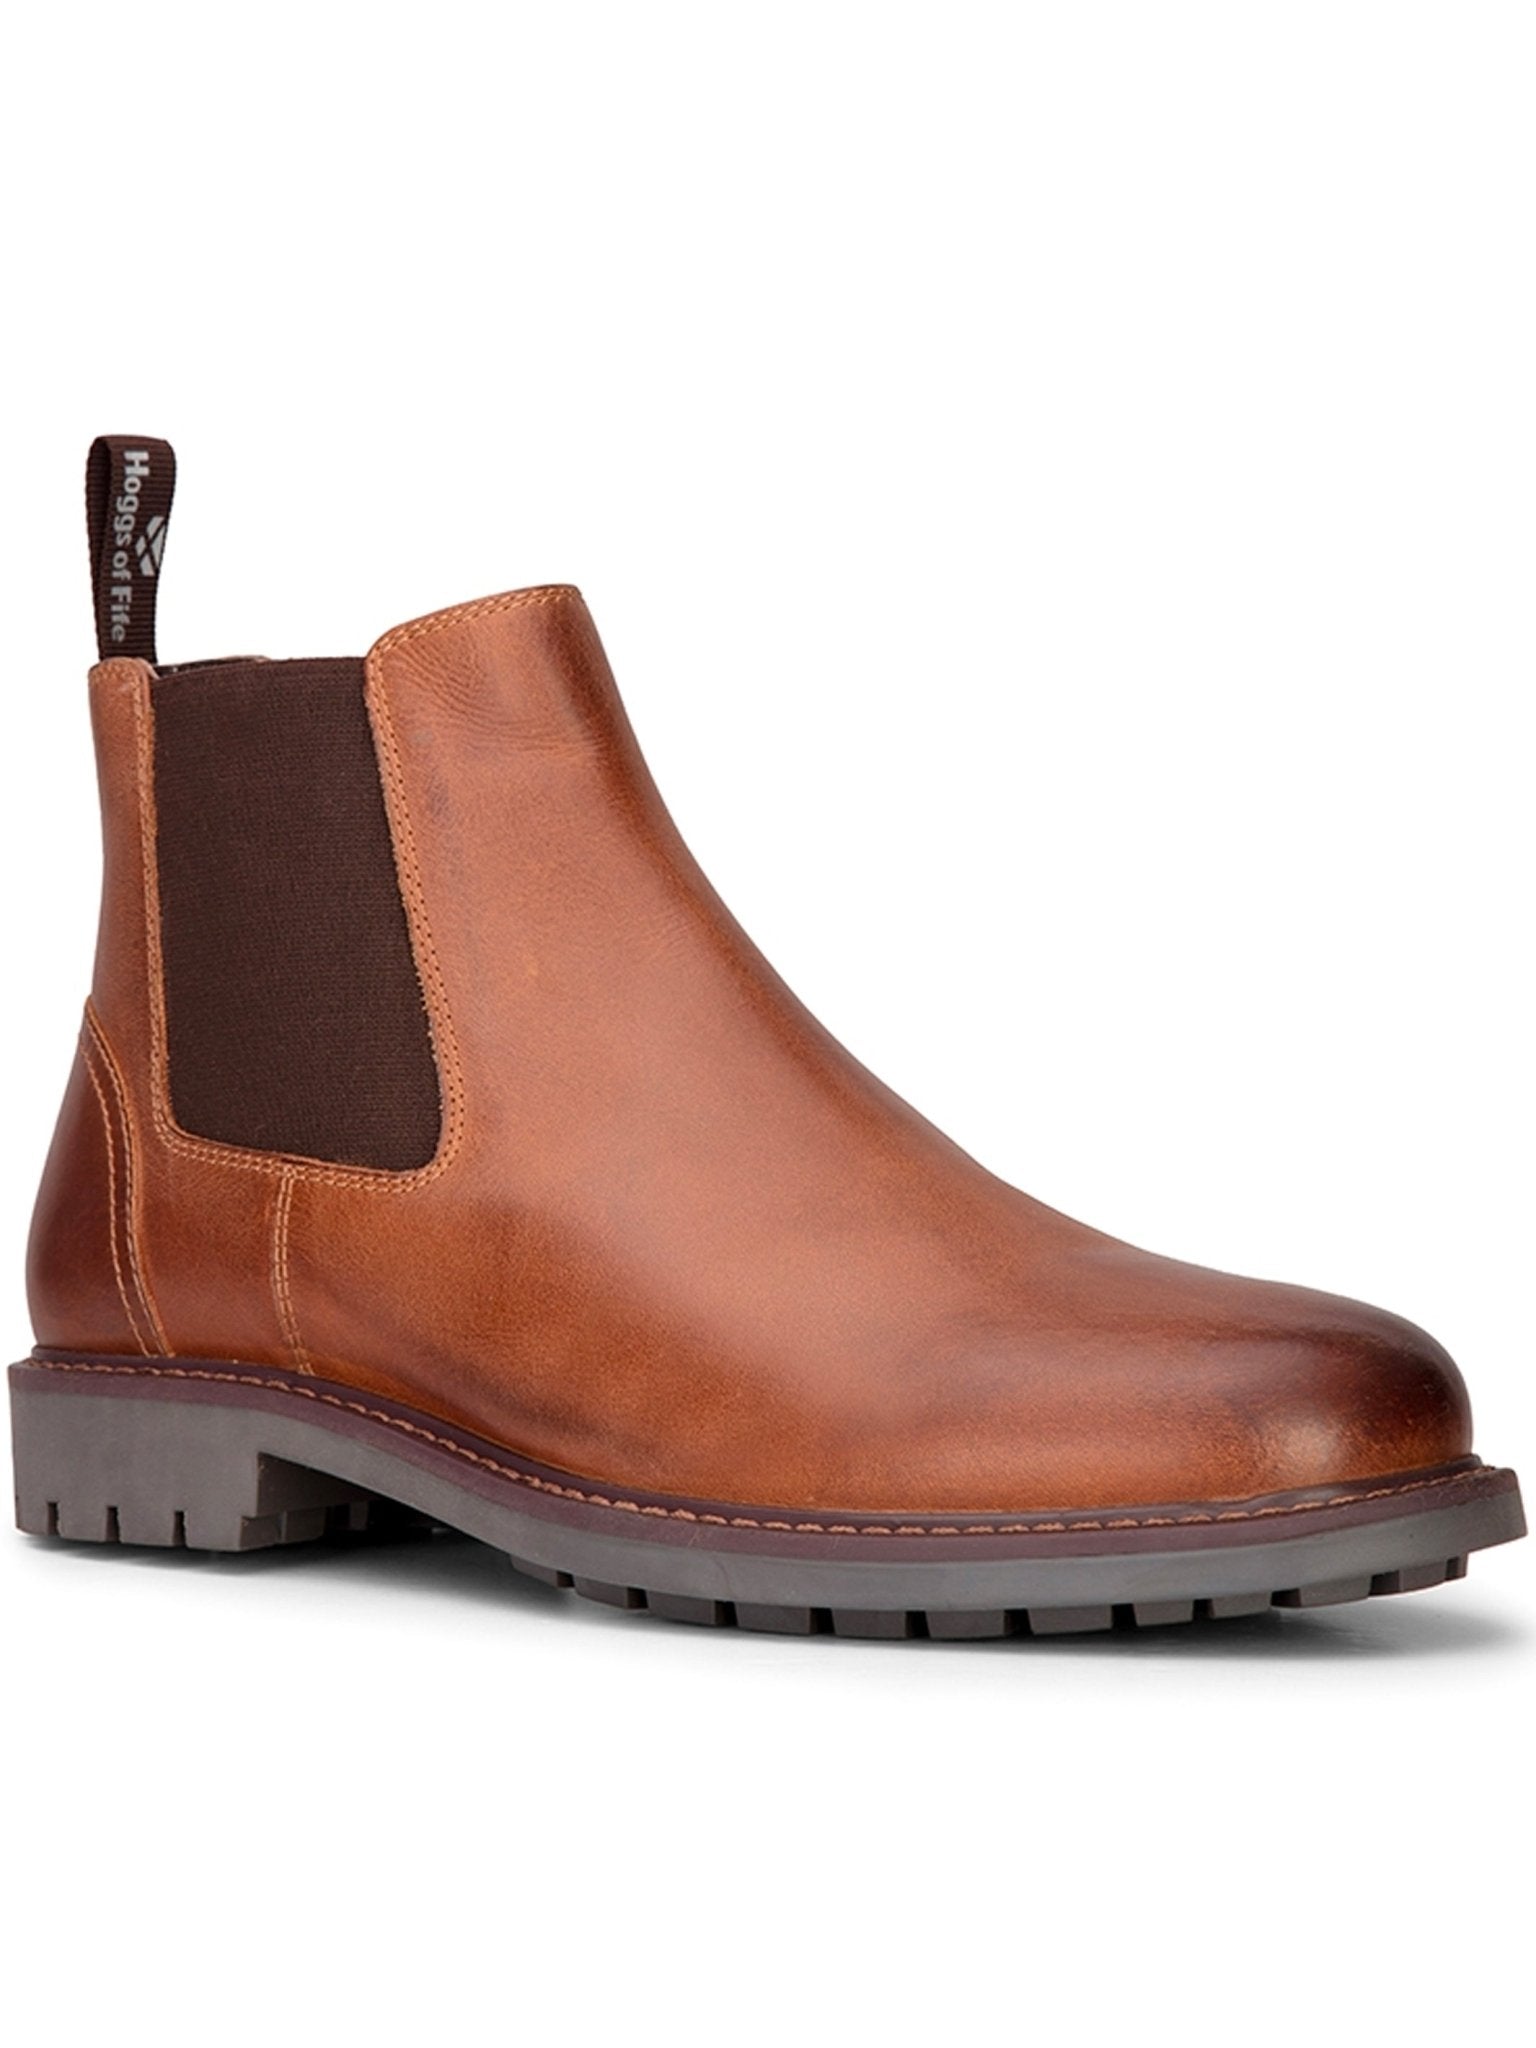 4elementsclothingHoggs of FifeHoggs of Fife - Mens Chelsea Boot / Dealer Boot - Banff Country ClassicBoots4232/TN/40